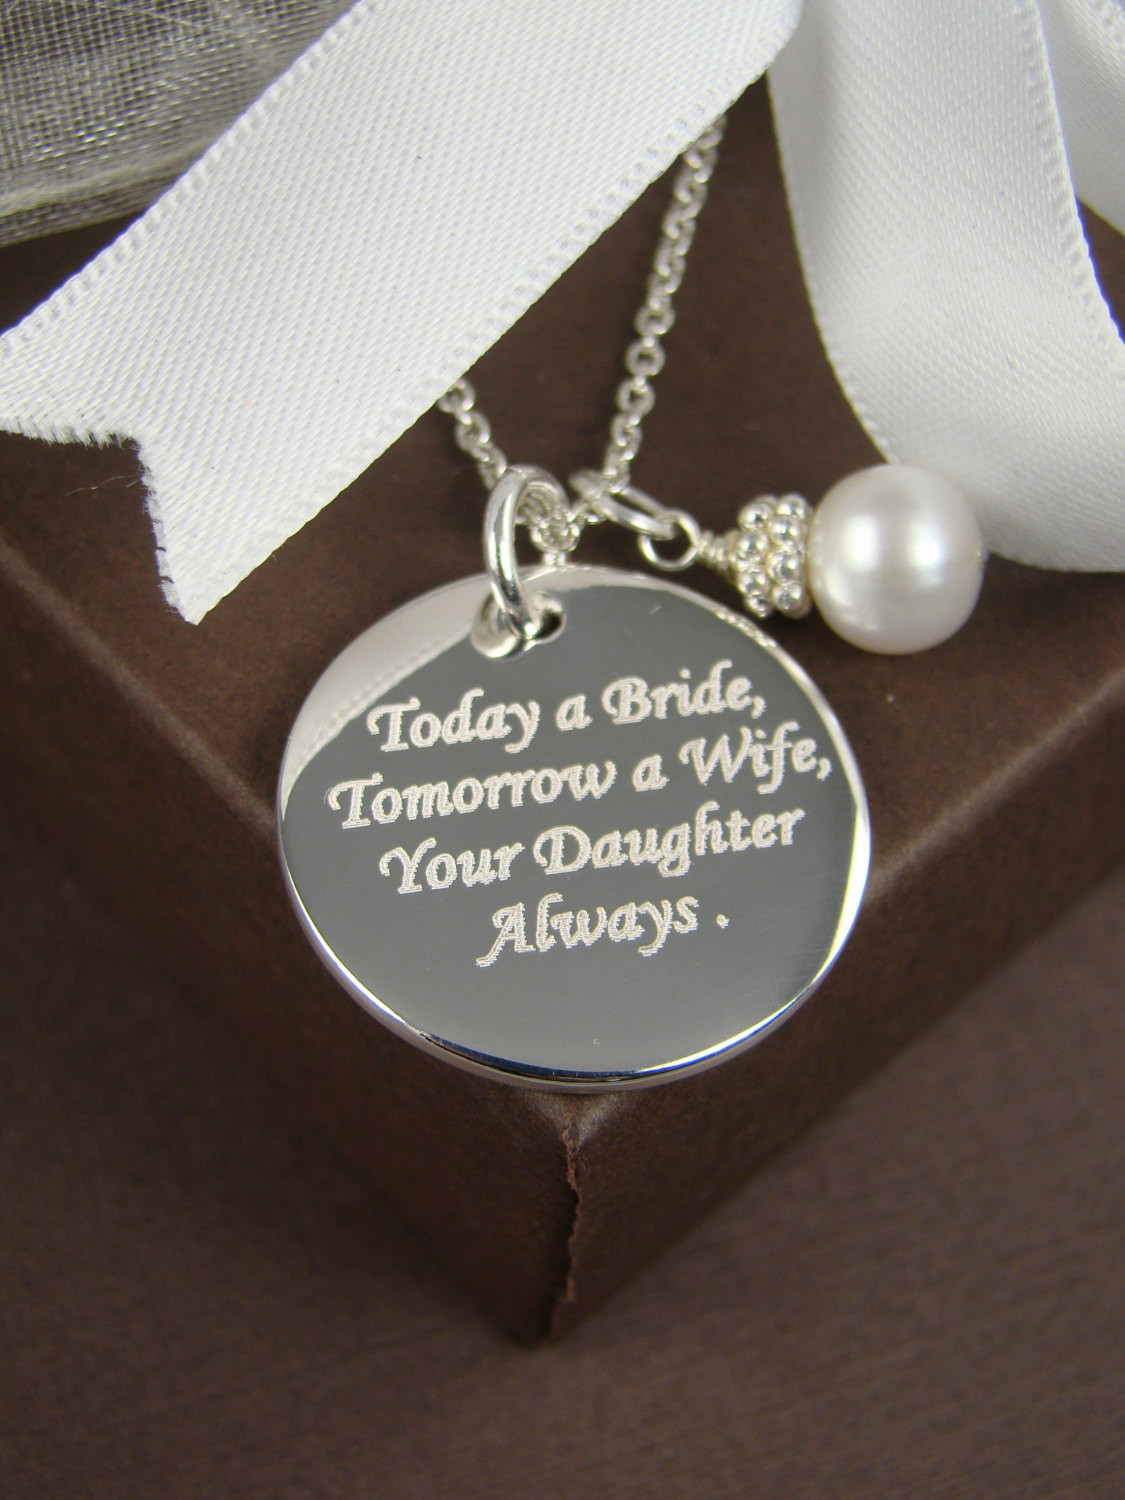 Wedding Gift Engraving Ideas
 Wedding Gift for Mother of the Bride Personalized Engraved